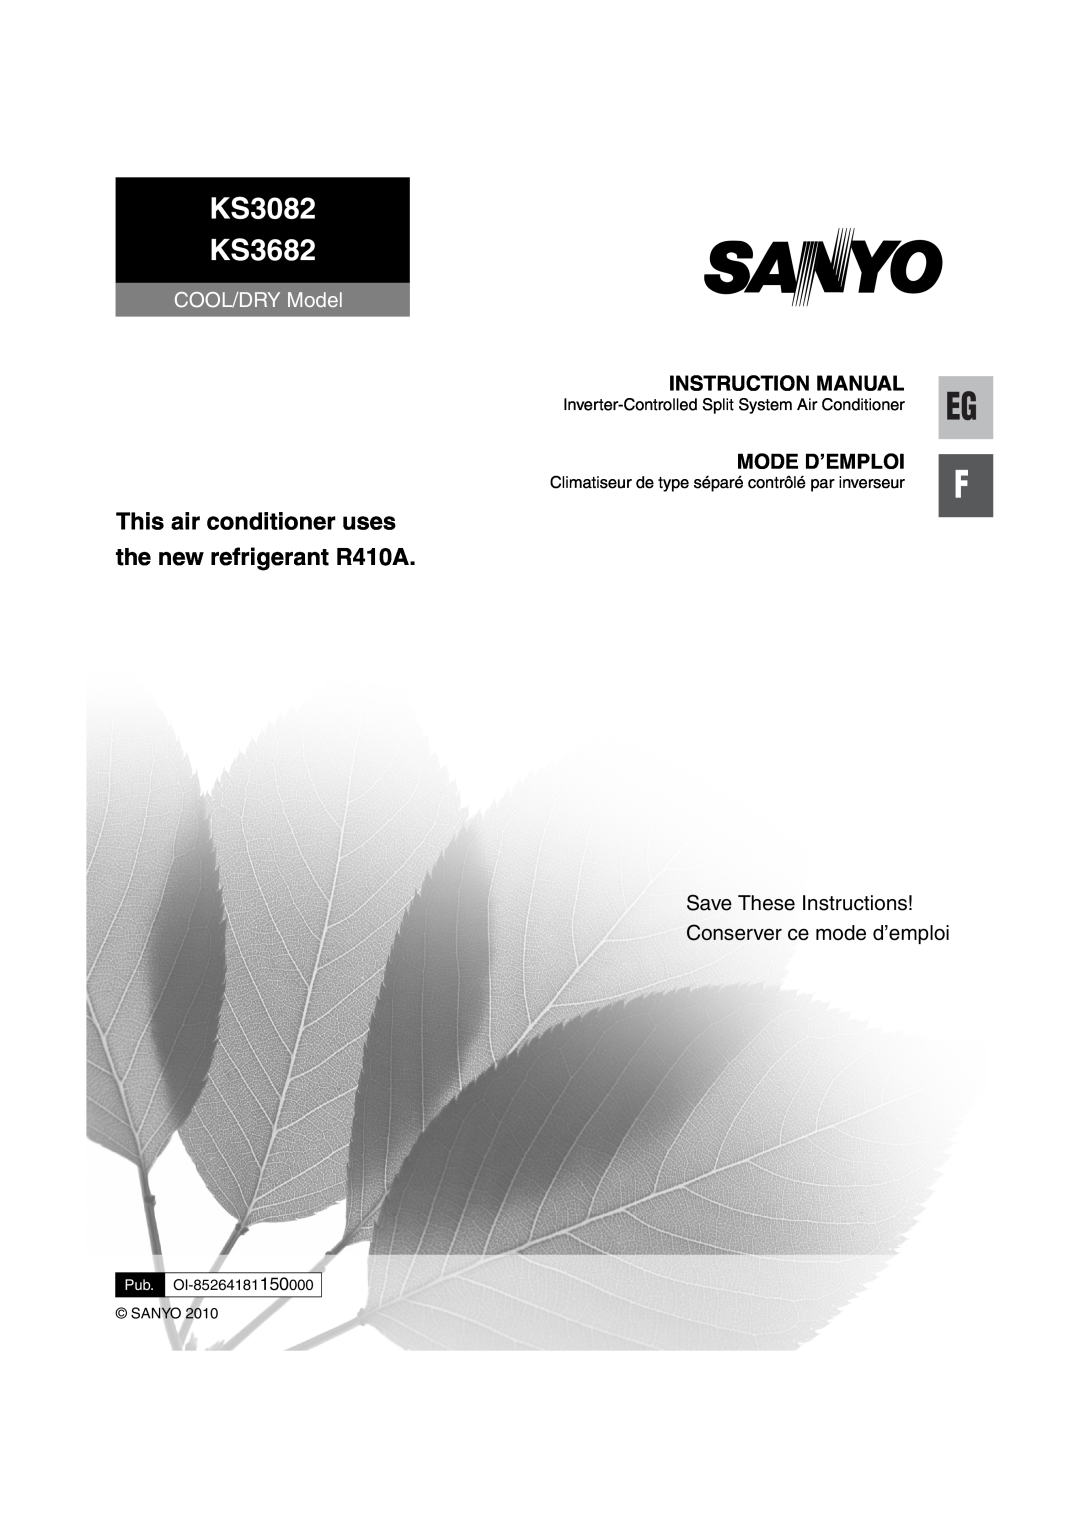 Sanyo C3682, C3082 KS3082 KS3682, This air conditioner uses the new refrigerant R410A, Instruction Manual, Mode D’Emploi 